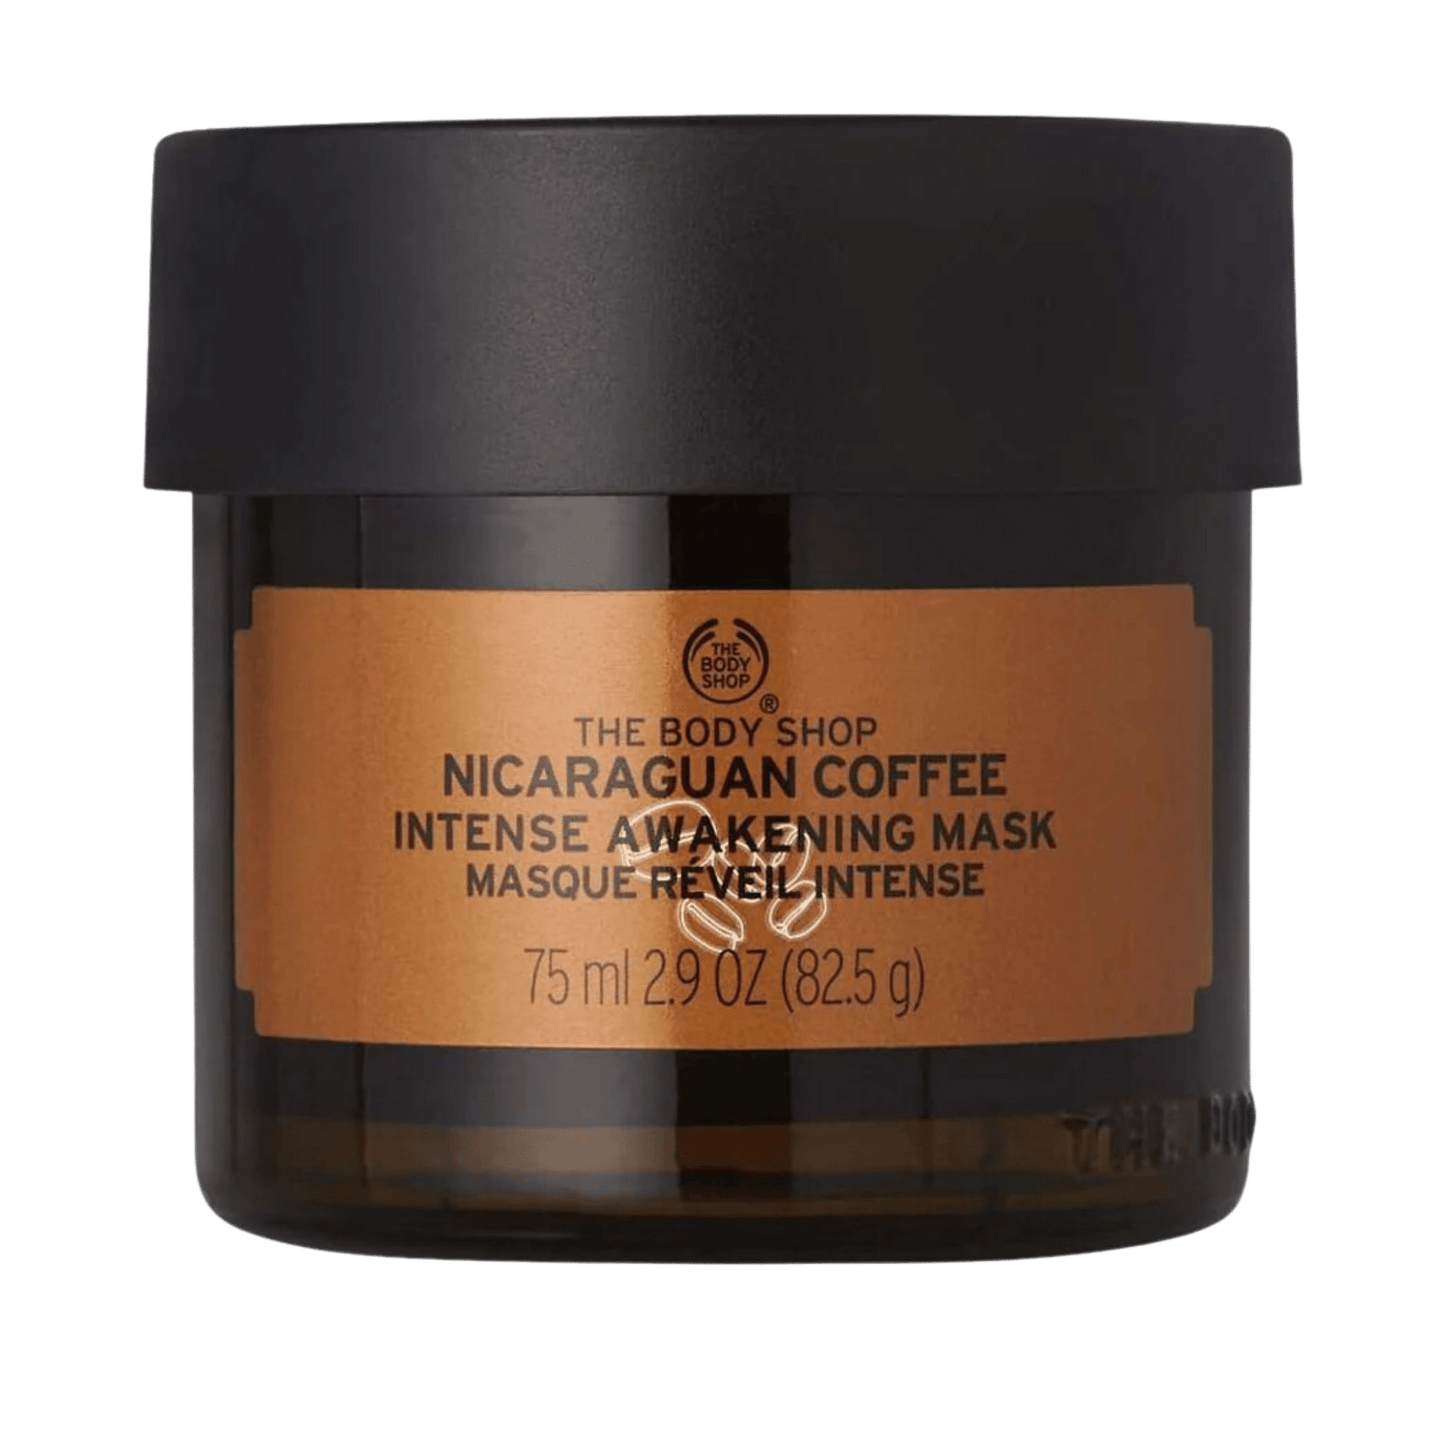 The Body Shop Nicaraguan Coffee Intense Awakening Mask  Is Now Available At Your Doorstep!